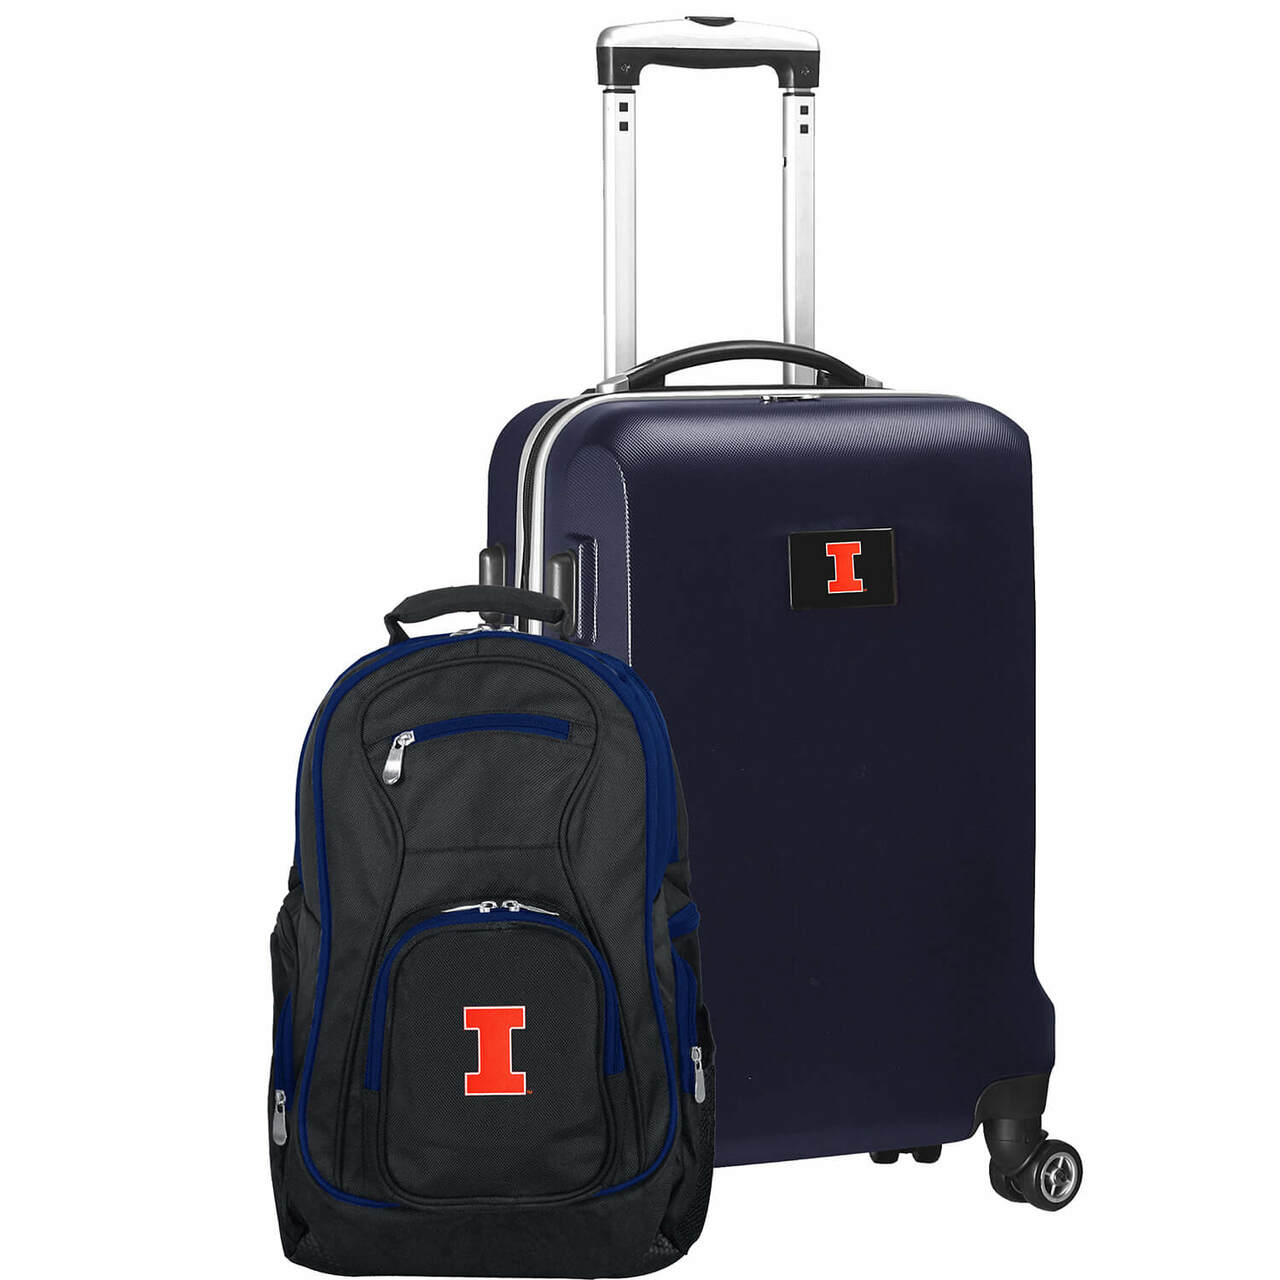 Illinois Fighting Illini Deluxe 2-Piece Backpack and Carry on Set in Navy